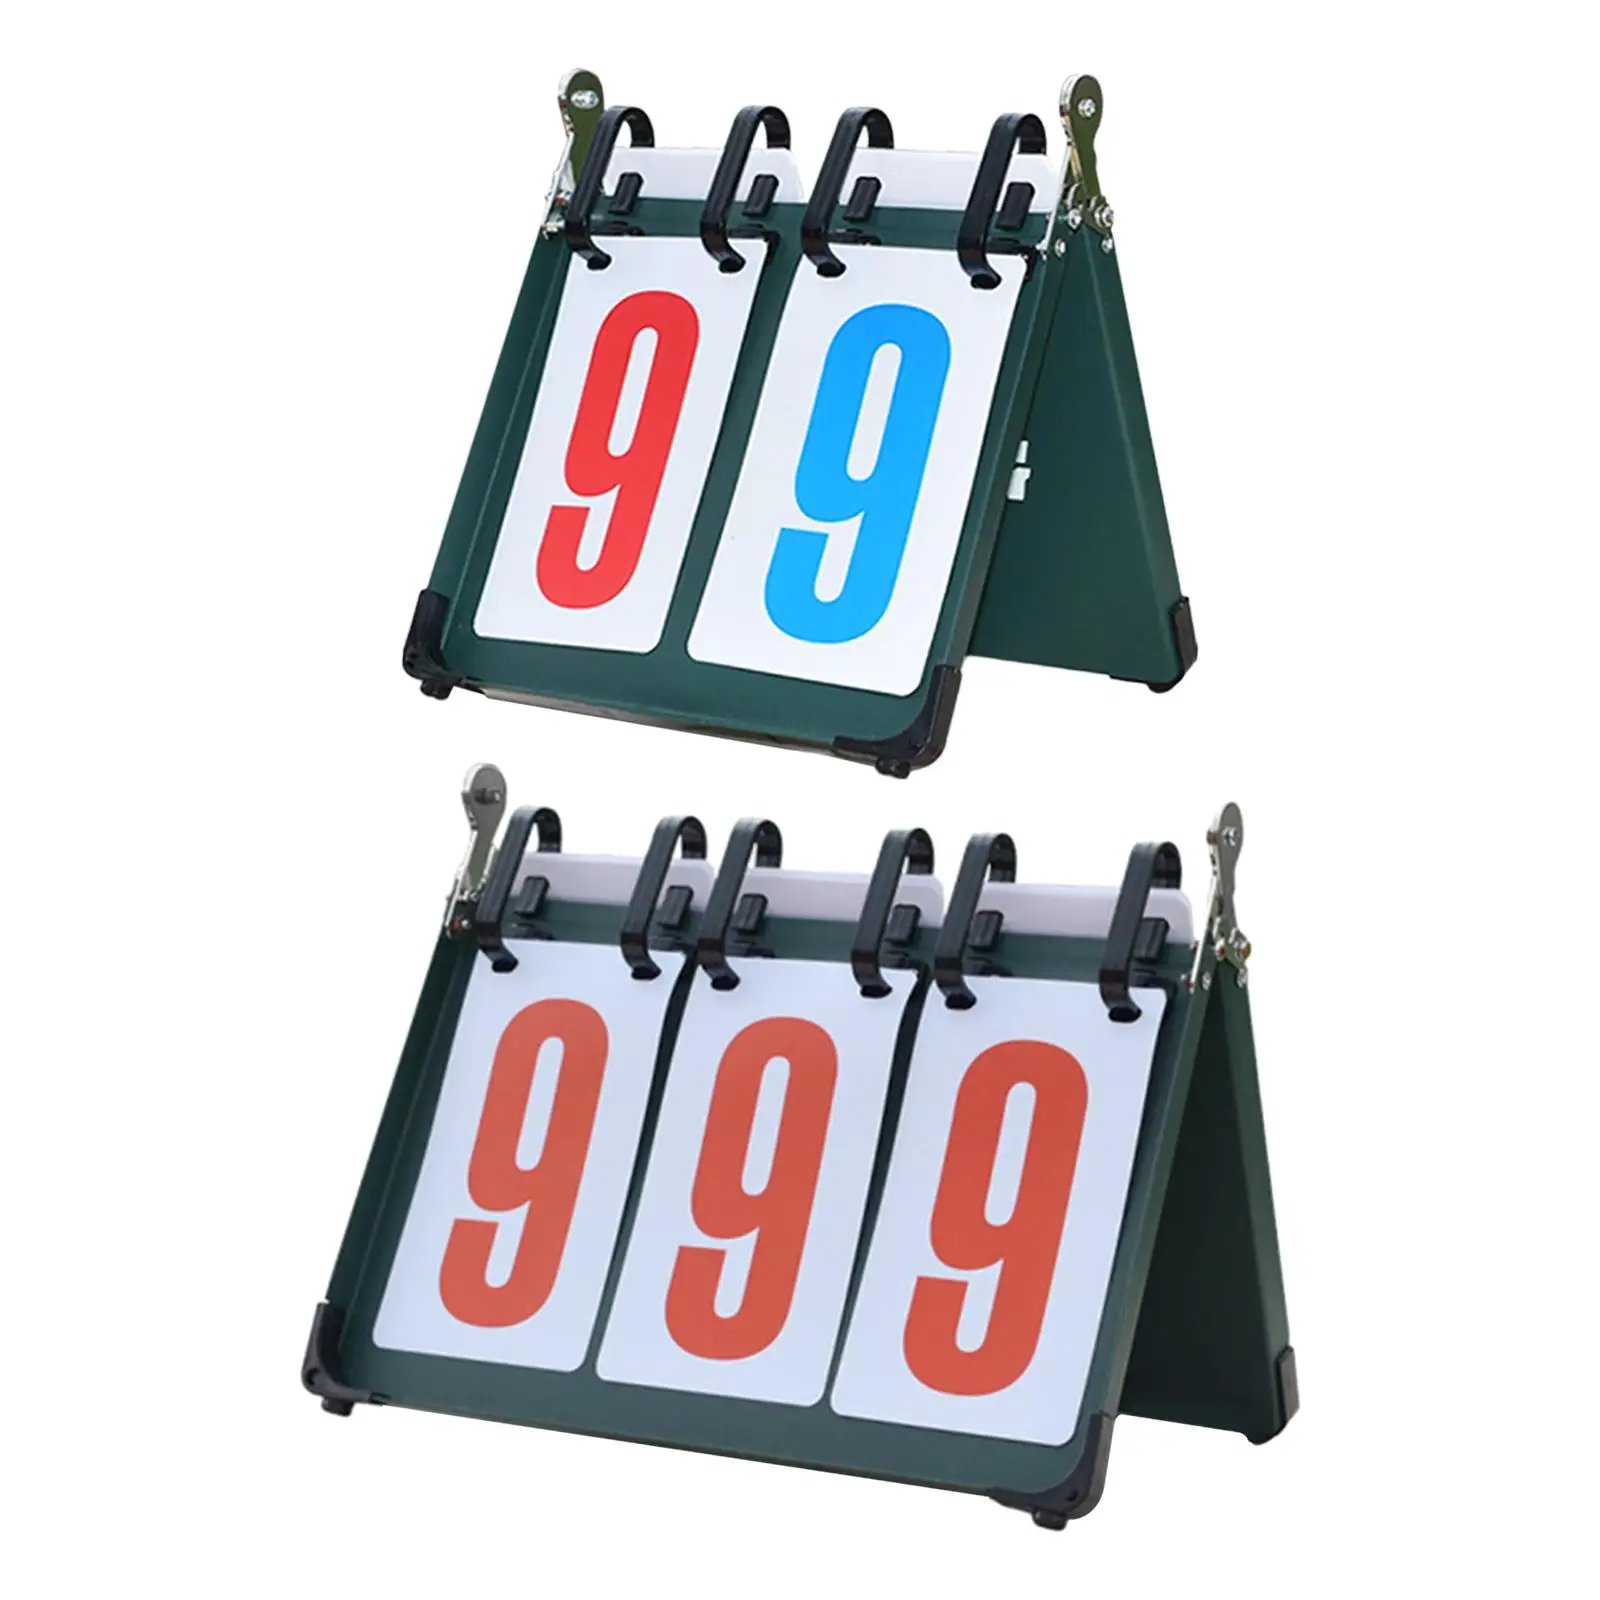 

Tabletop Score Flippers Sports Scoreboard Flip Number Score Board for Volleyball Competition Soccer Badminton Tennis Ball